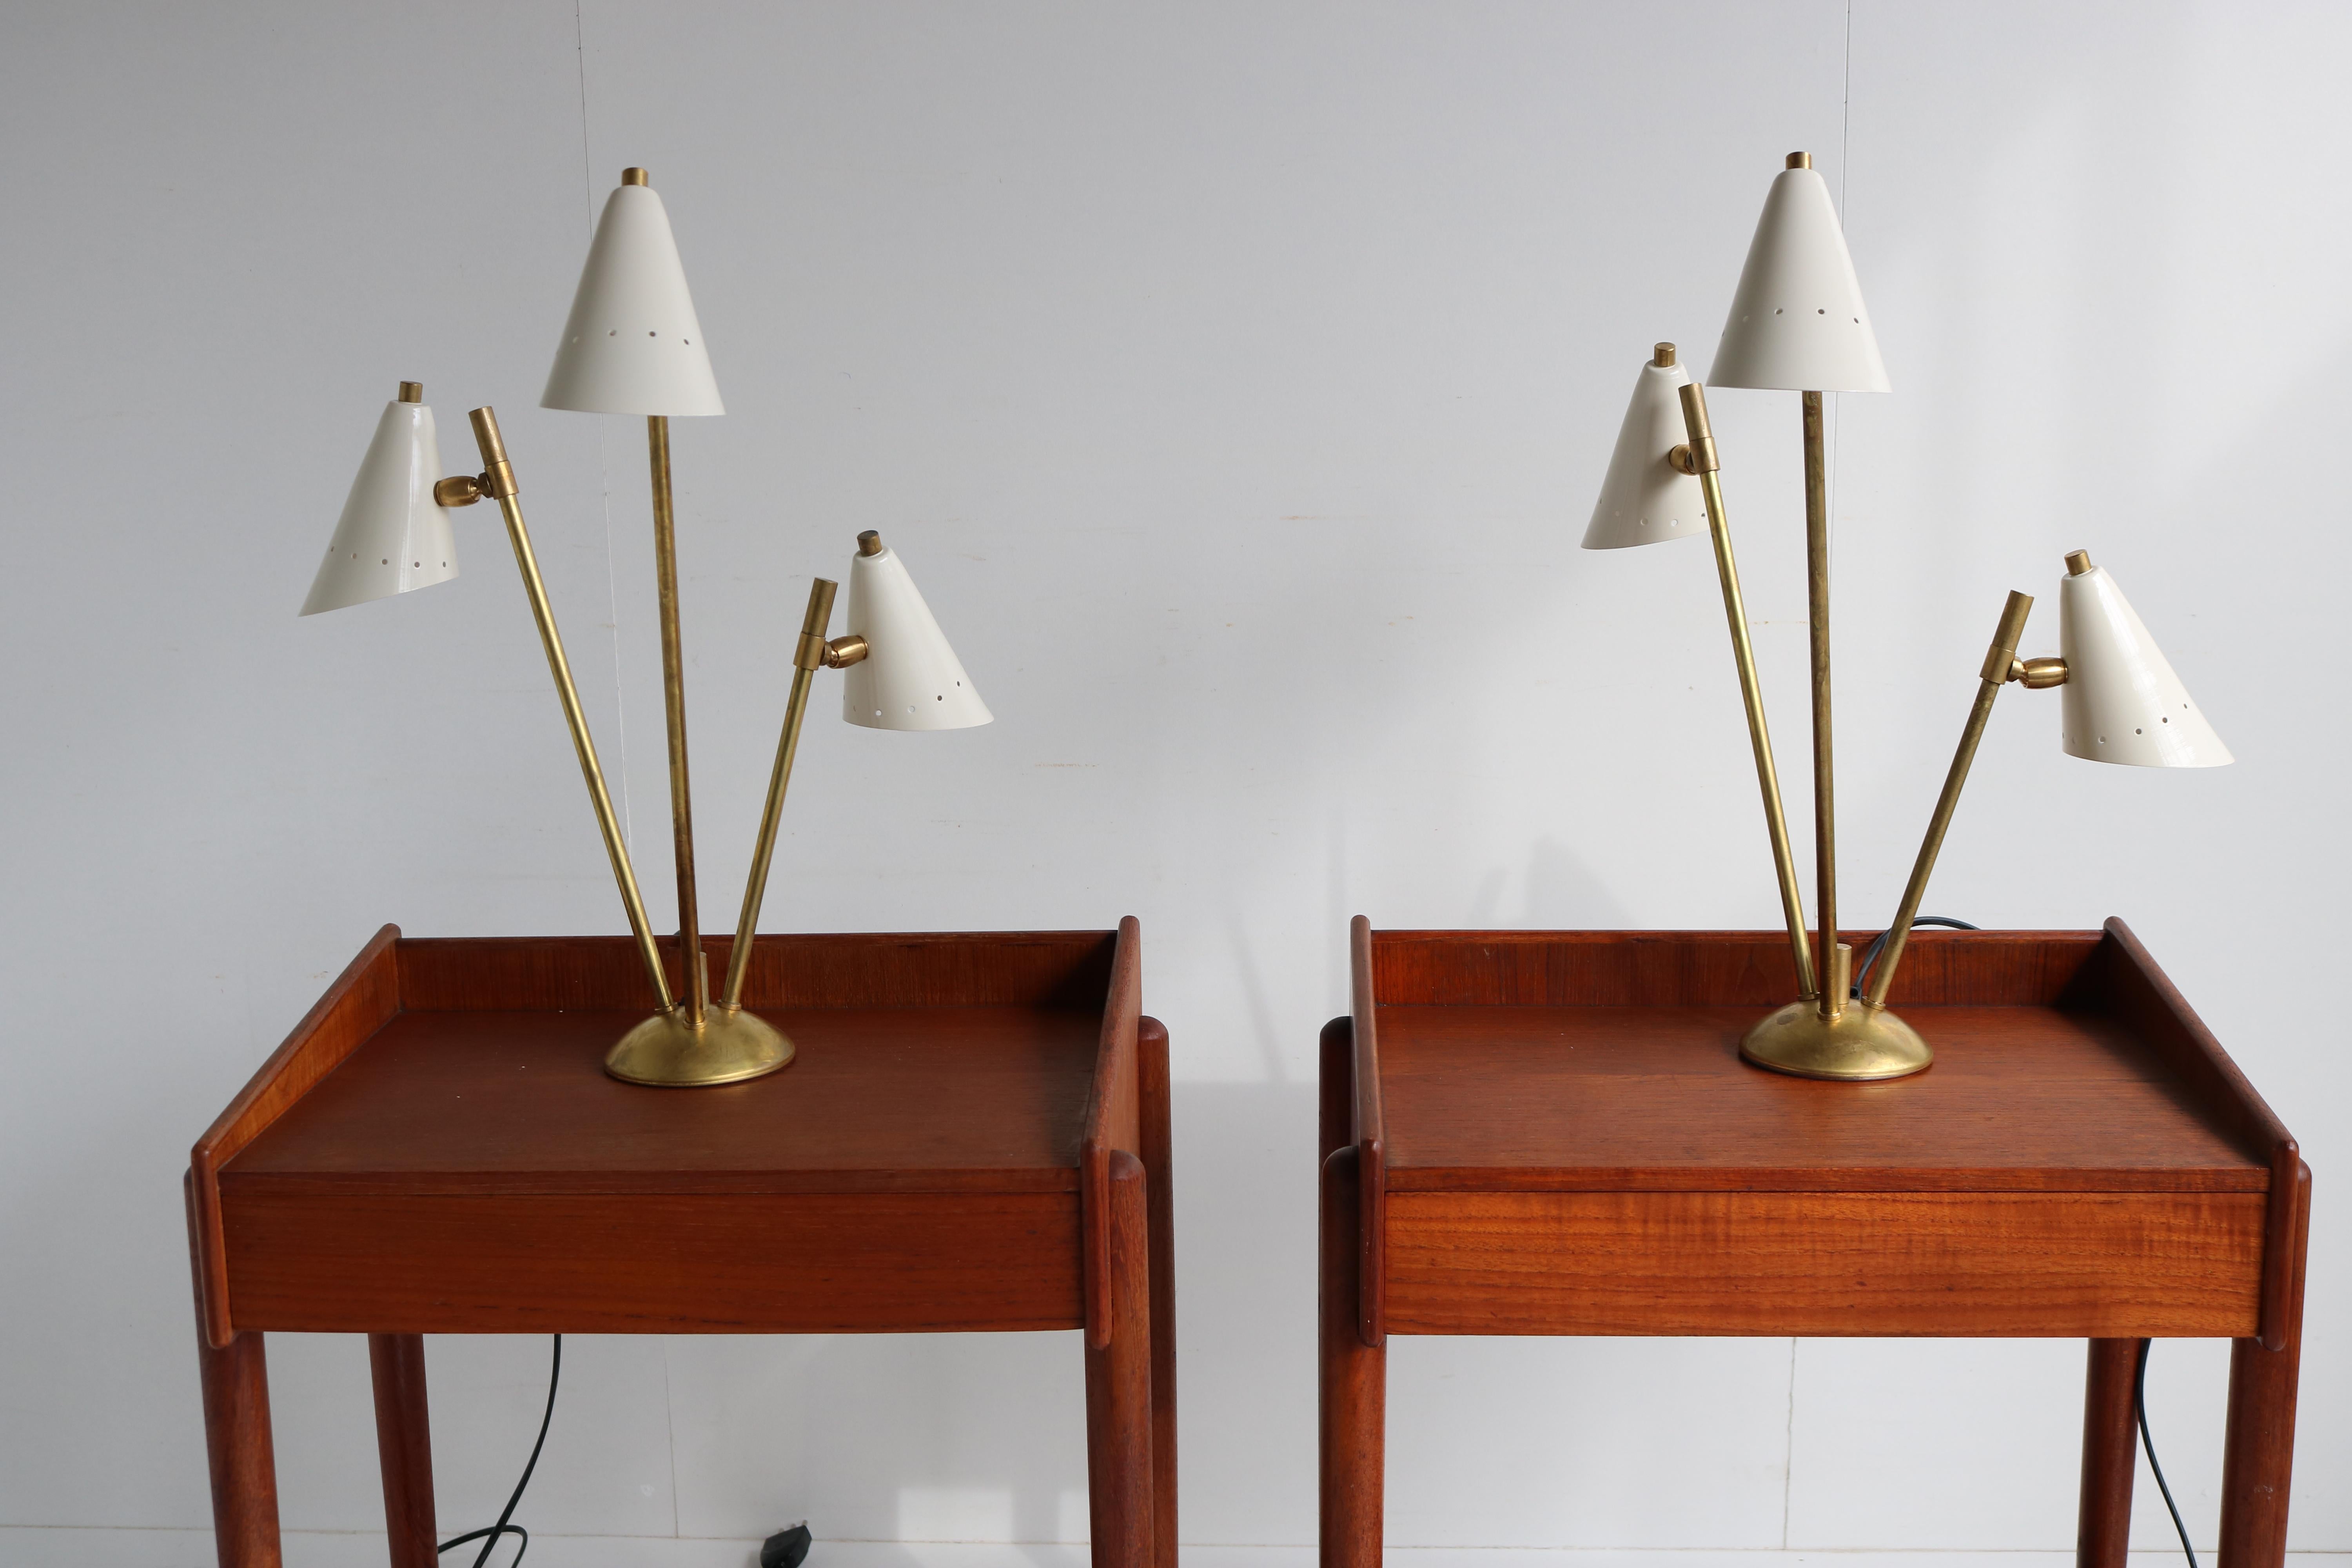 Gorgeous pair of Italian 1950 design table lamps/lights in the style of stilnovo. 
Patinated brass frame with white metal shades. The shades can be adjusted to a desired angle.
They combine really well with teak as seen in pictures. 

Rewired